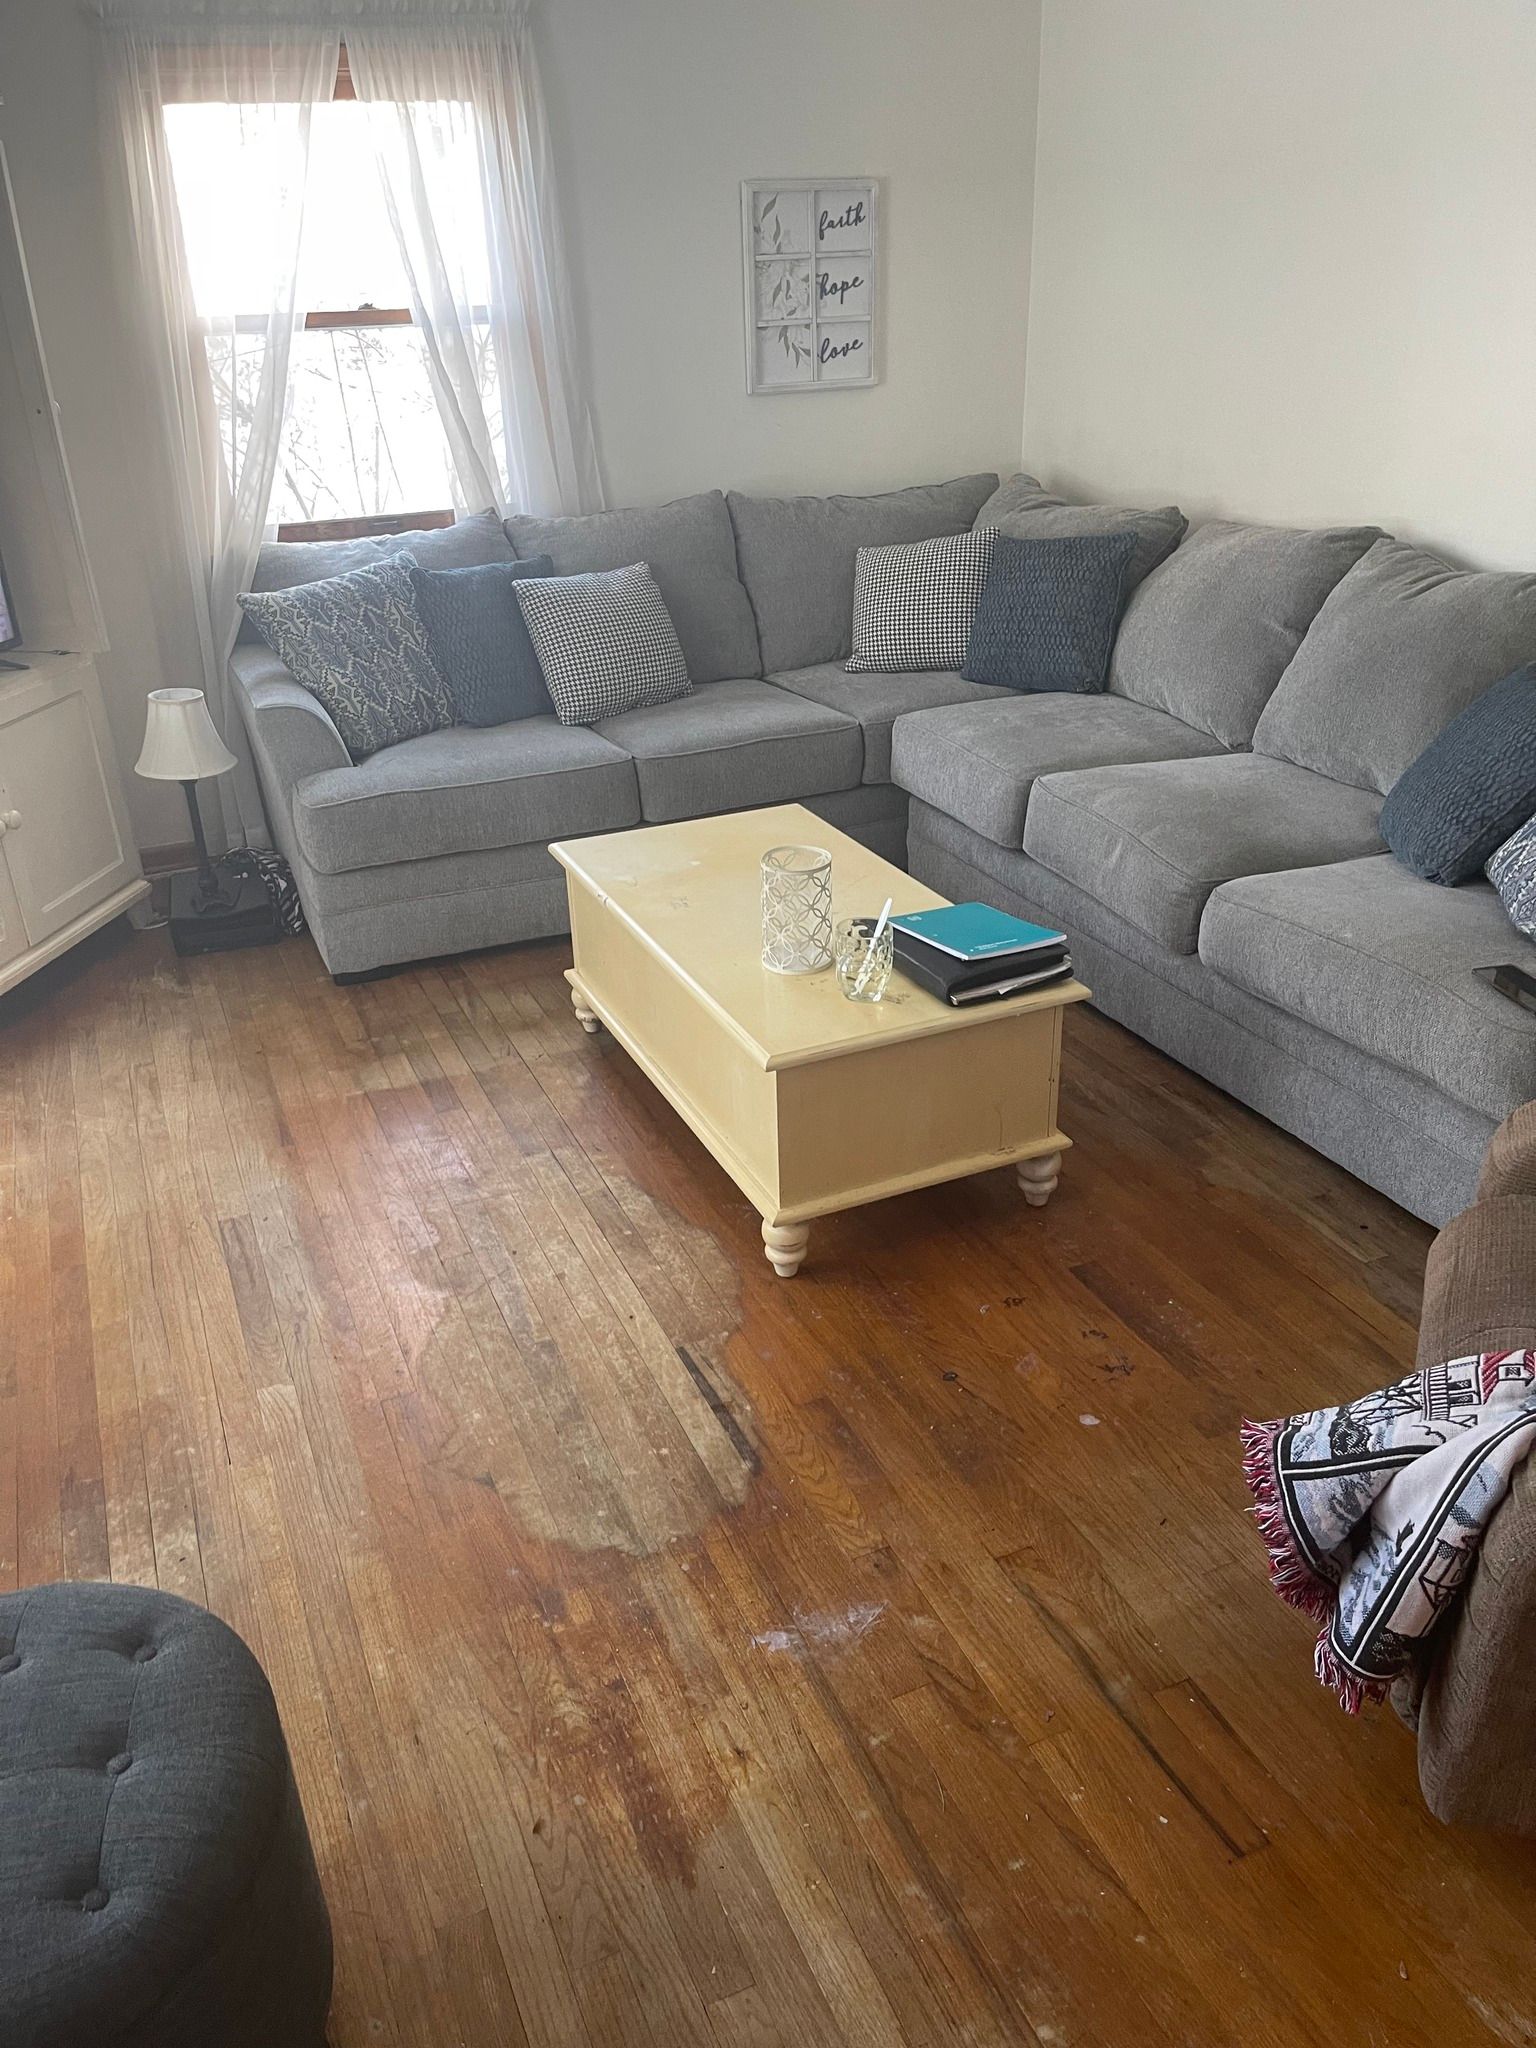 After is a tidy and organized living room after professional cleaning by Ancilla